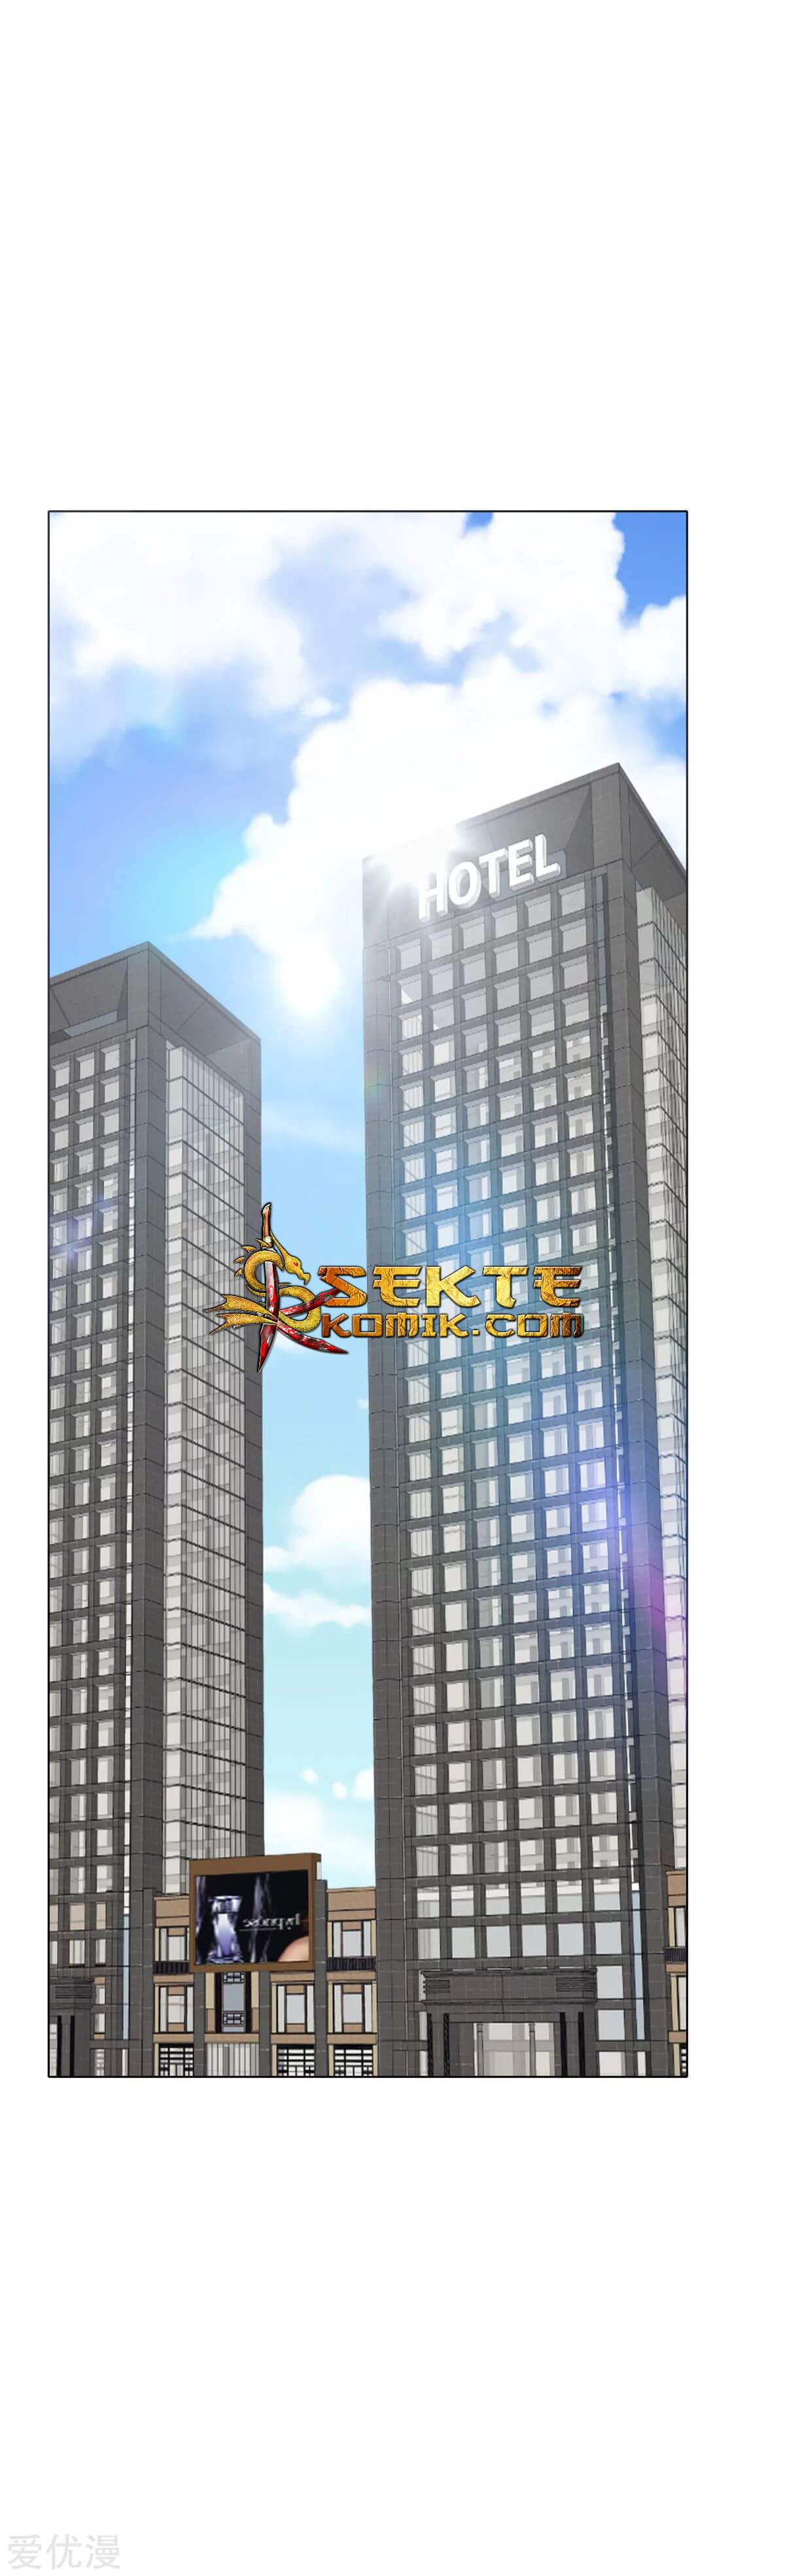 Xianzun System in the City Chapter 43